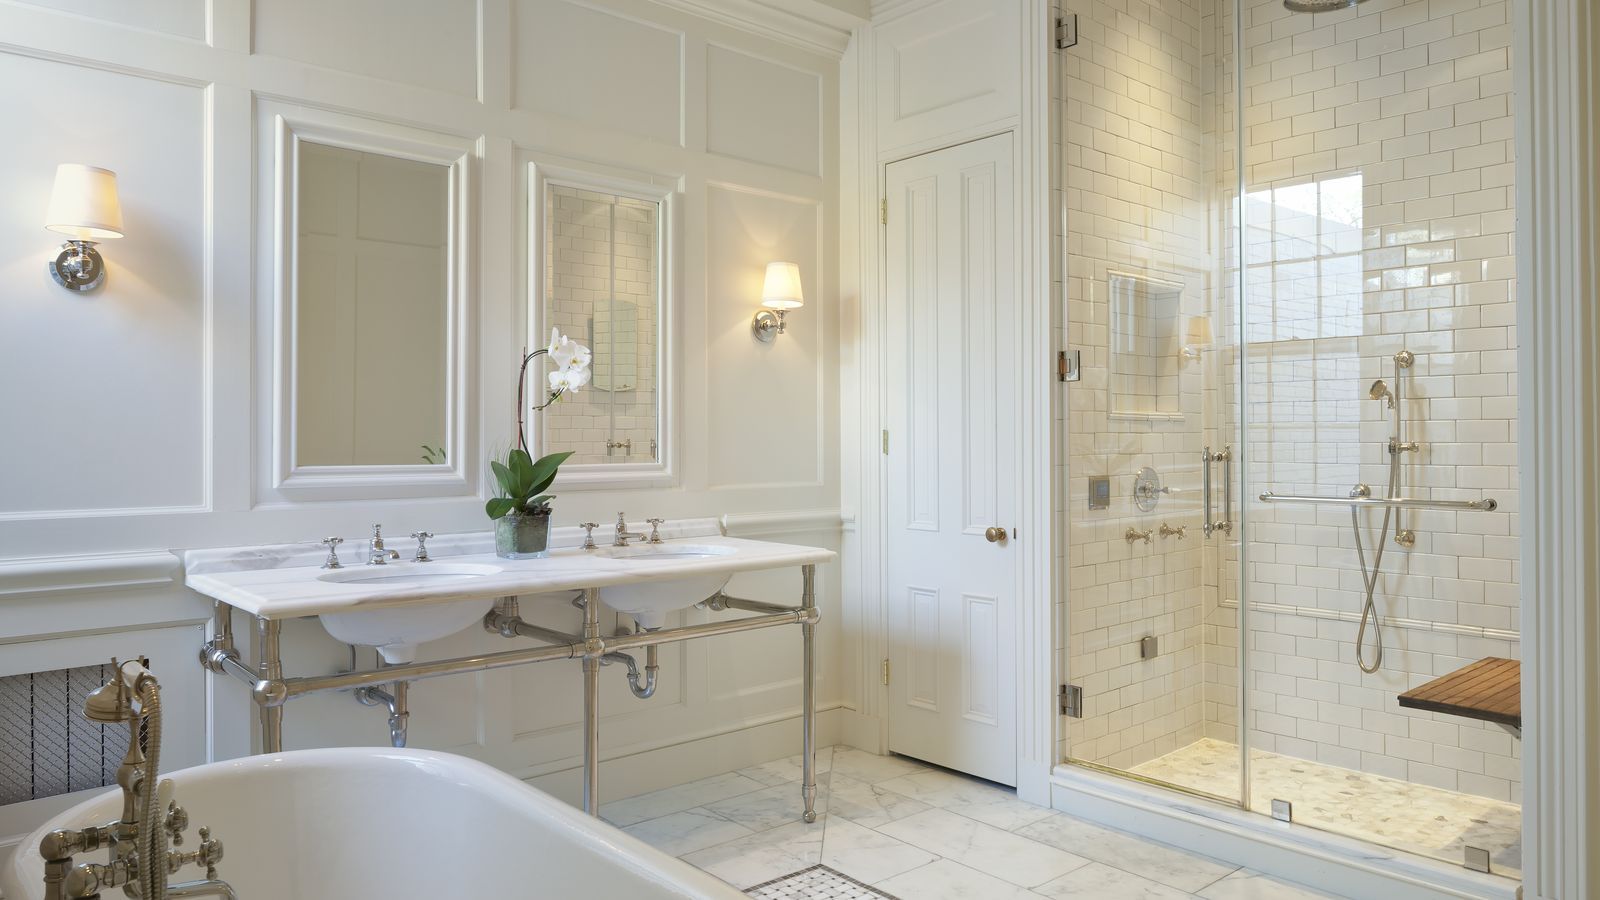 A photo showing a white bathroom with two sinks, exposed plumbing underneath, a see-through shower with glass doors and multiple sprayers and a bathtub